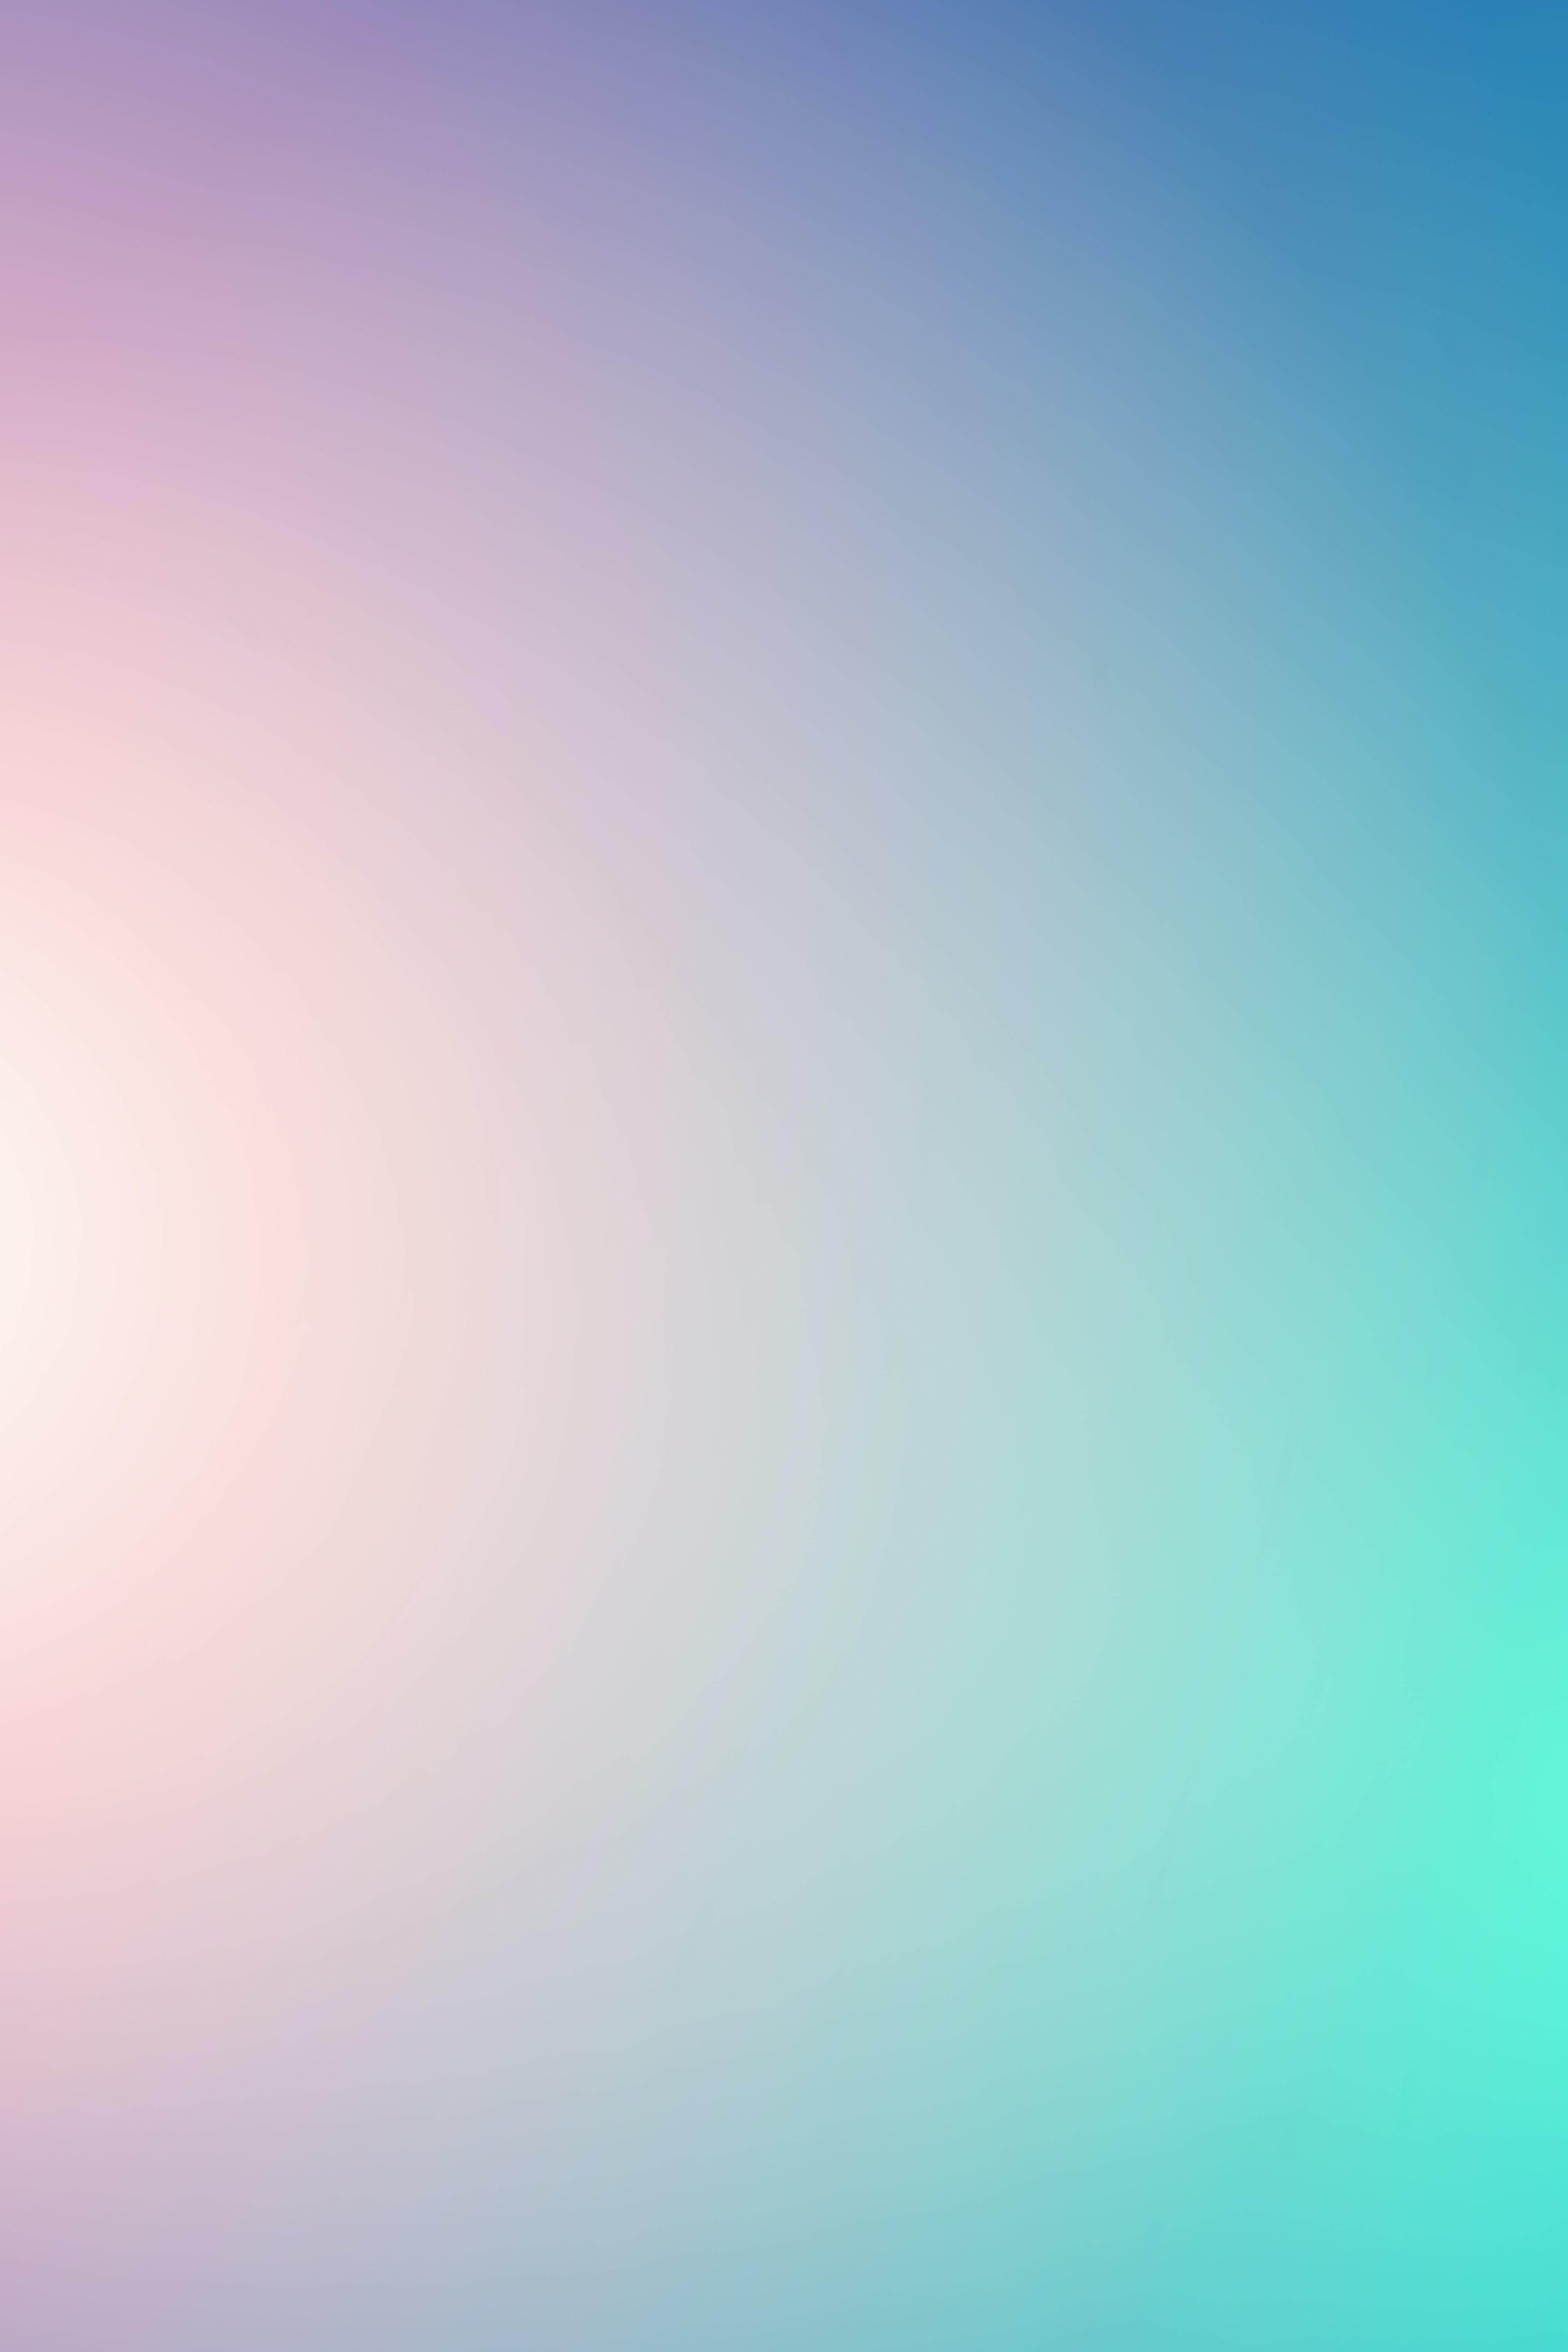 multicolored, gradient, motley, tender, abstract QHD